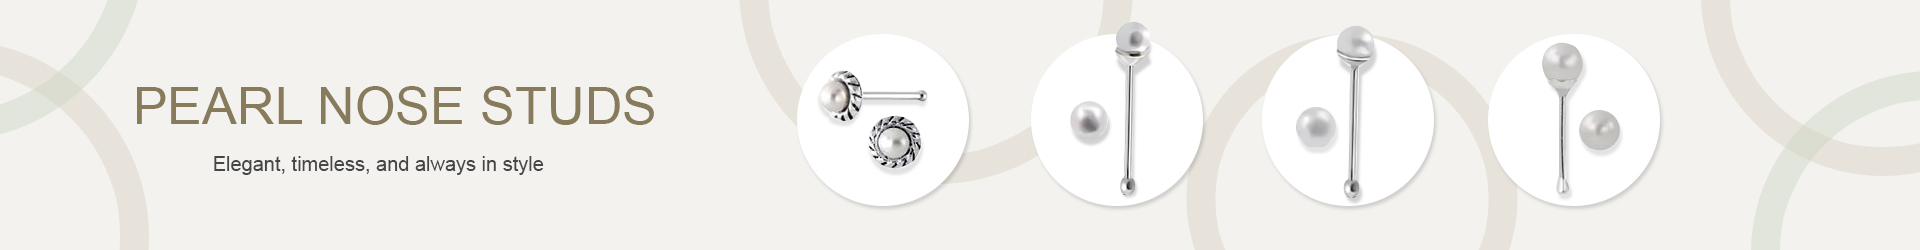 Pearl Nose Studs